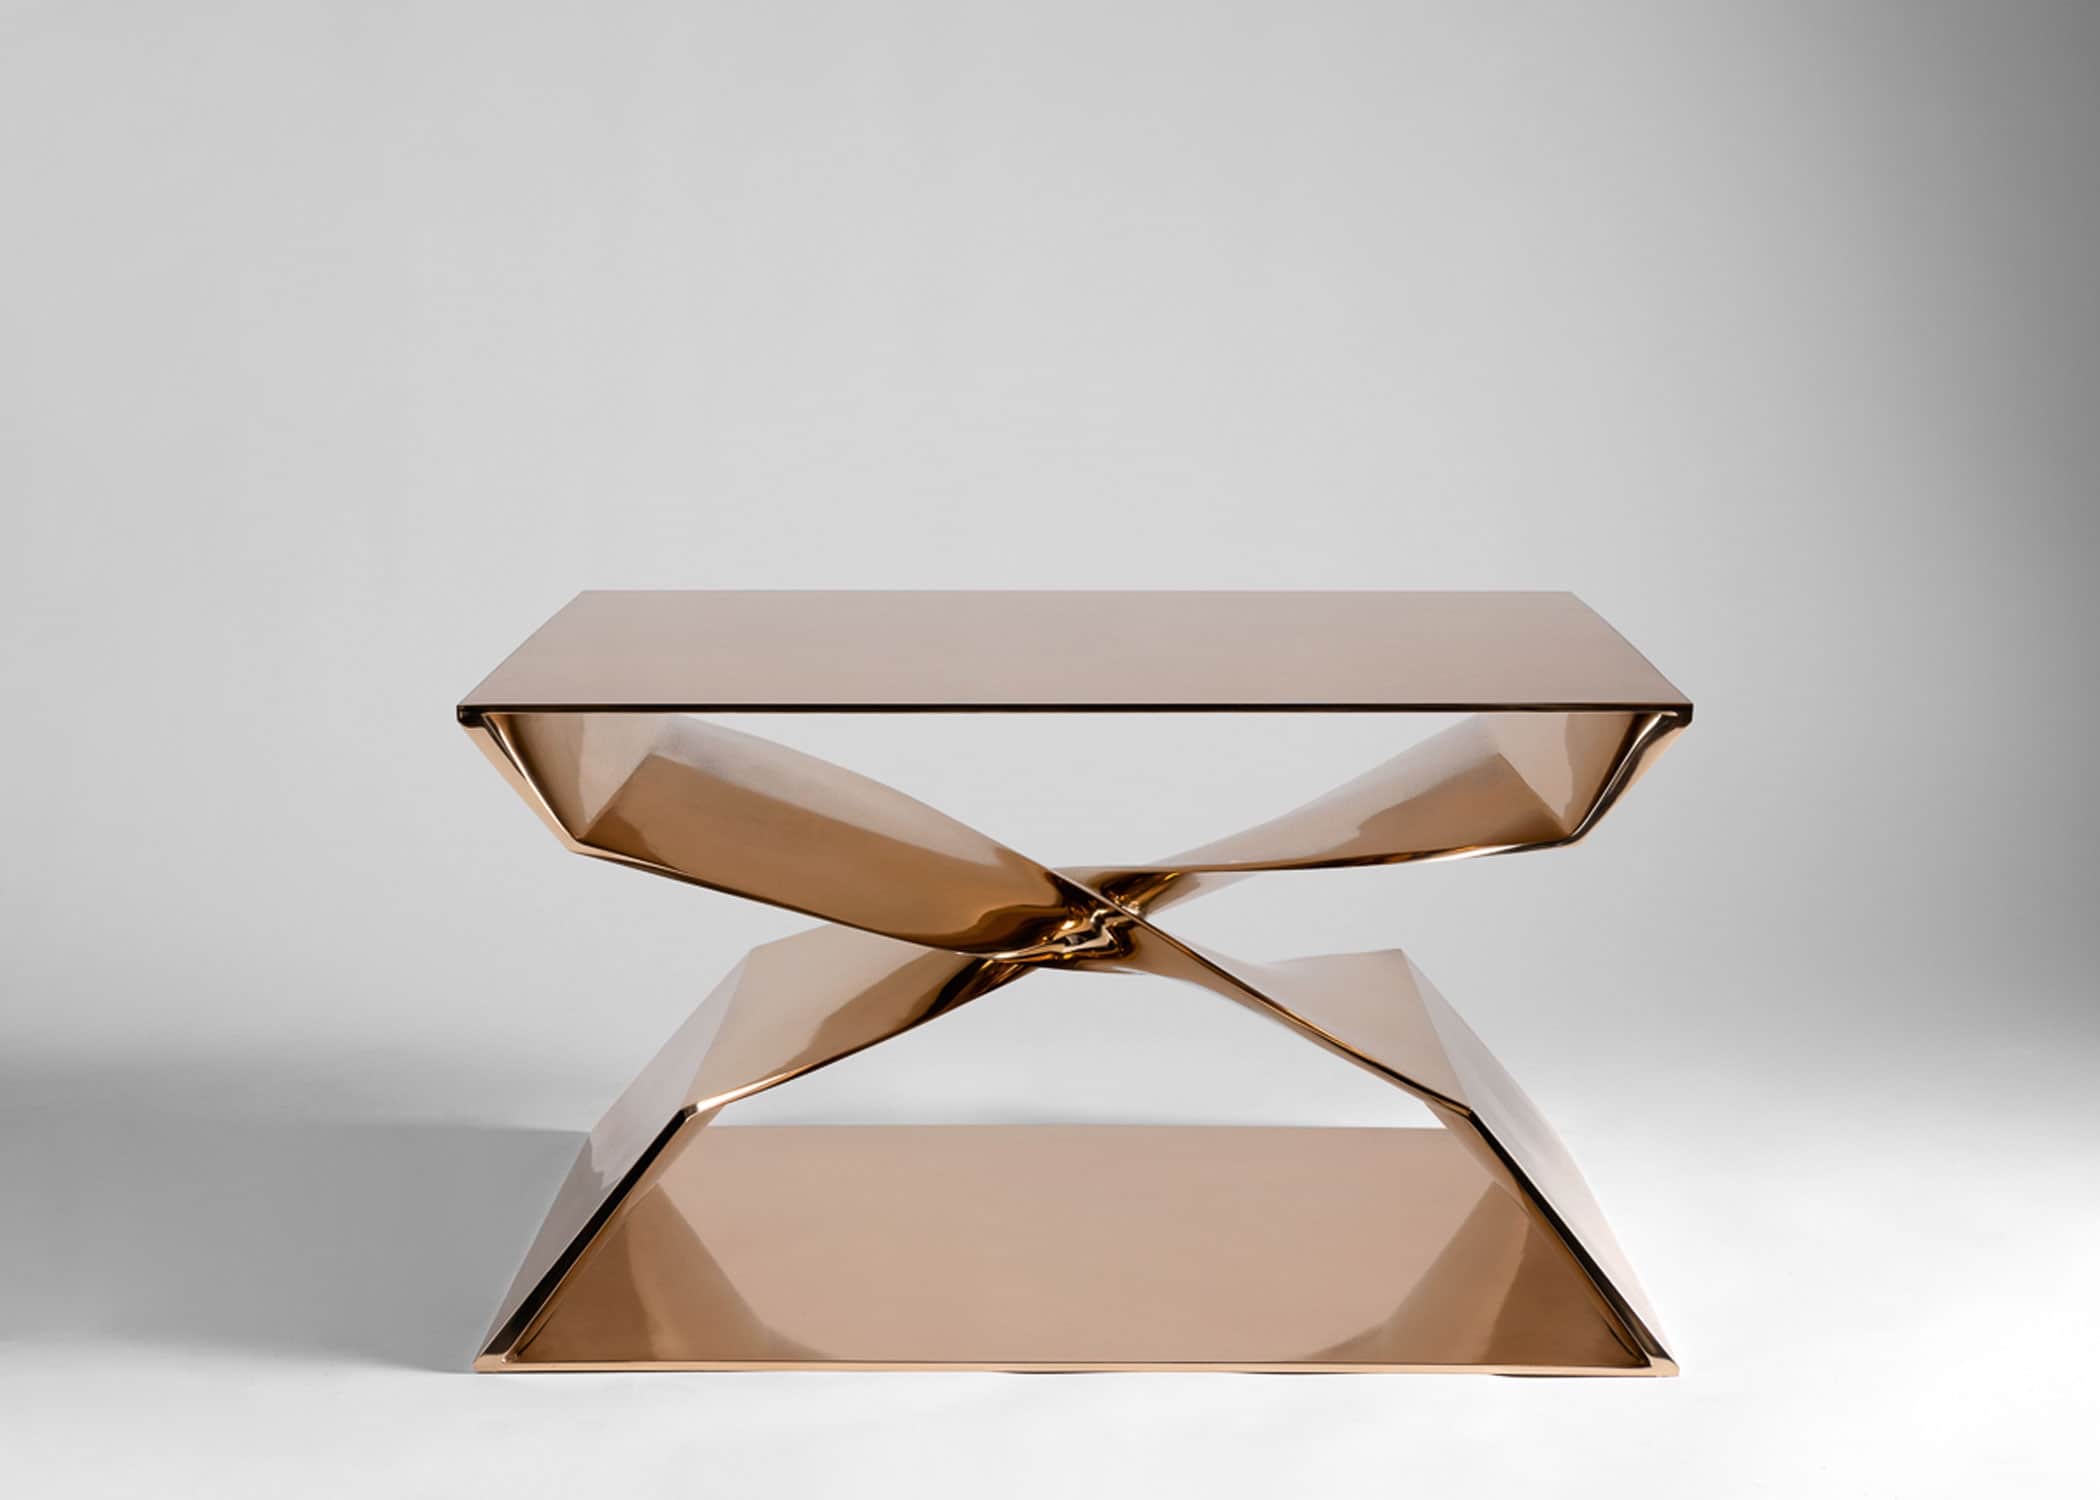 This image shows a front elevation view of the CE24 Cast Silicon bronze cast X shaped coffee table, mirror polished finish designed by Carol Egan.  Dimensions are 30" w x 24" d x 18"h.  The table is shown against a grey background.  The table consists of two interlocked cast forms that make an X shape.